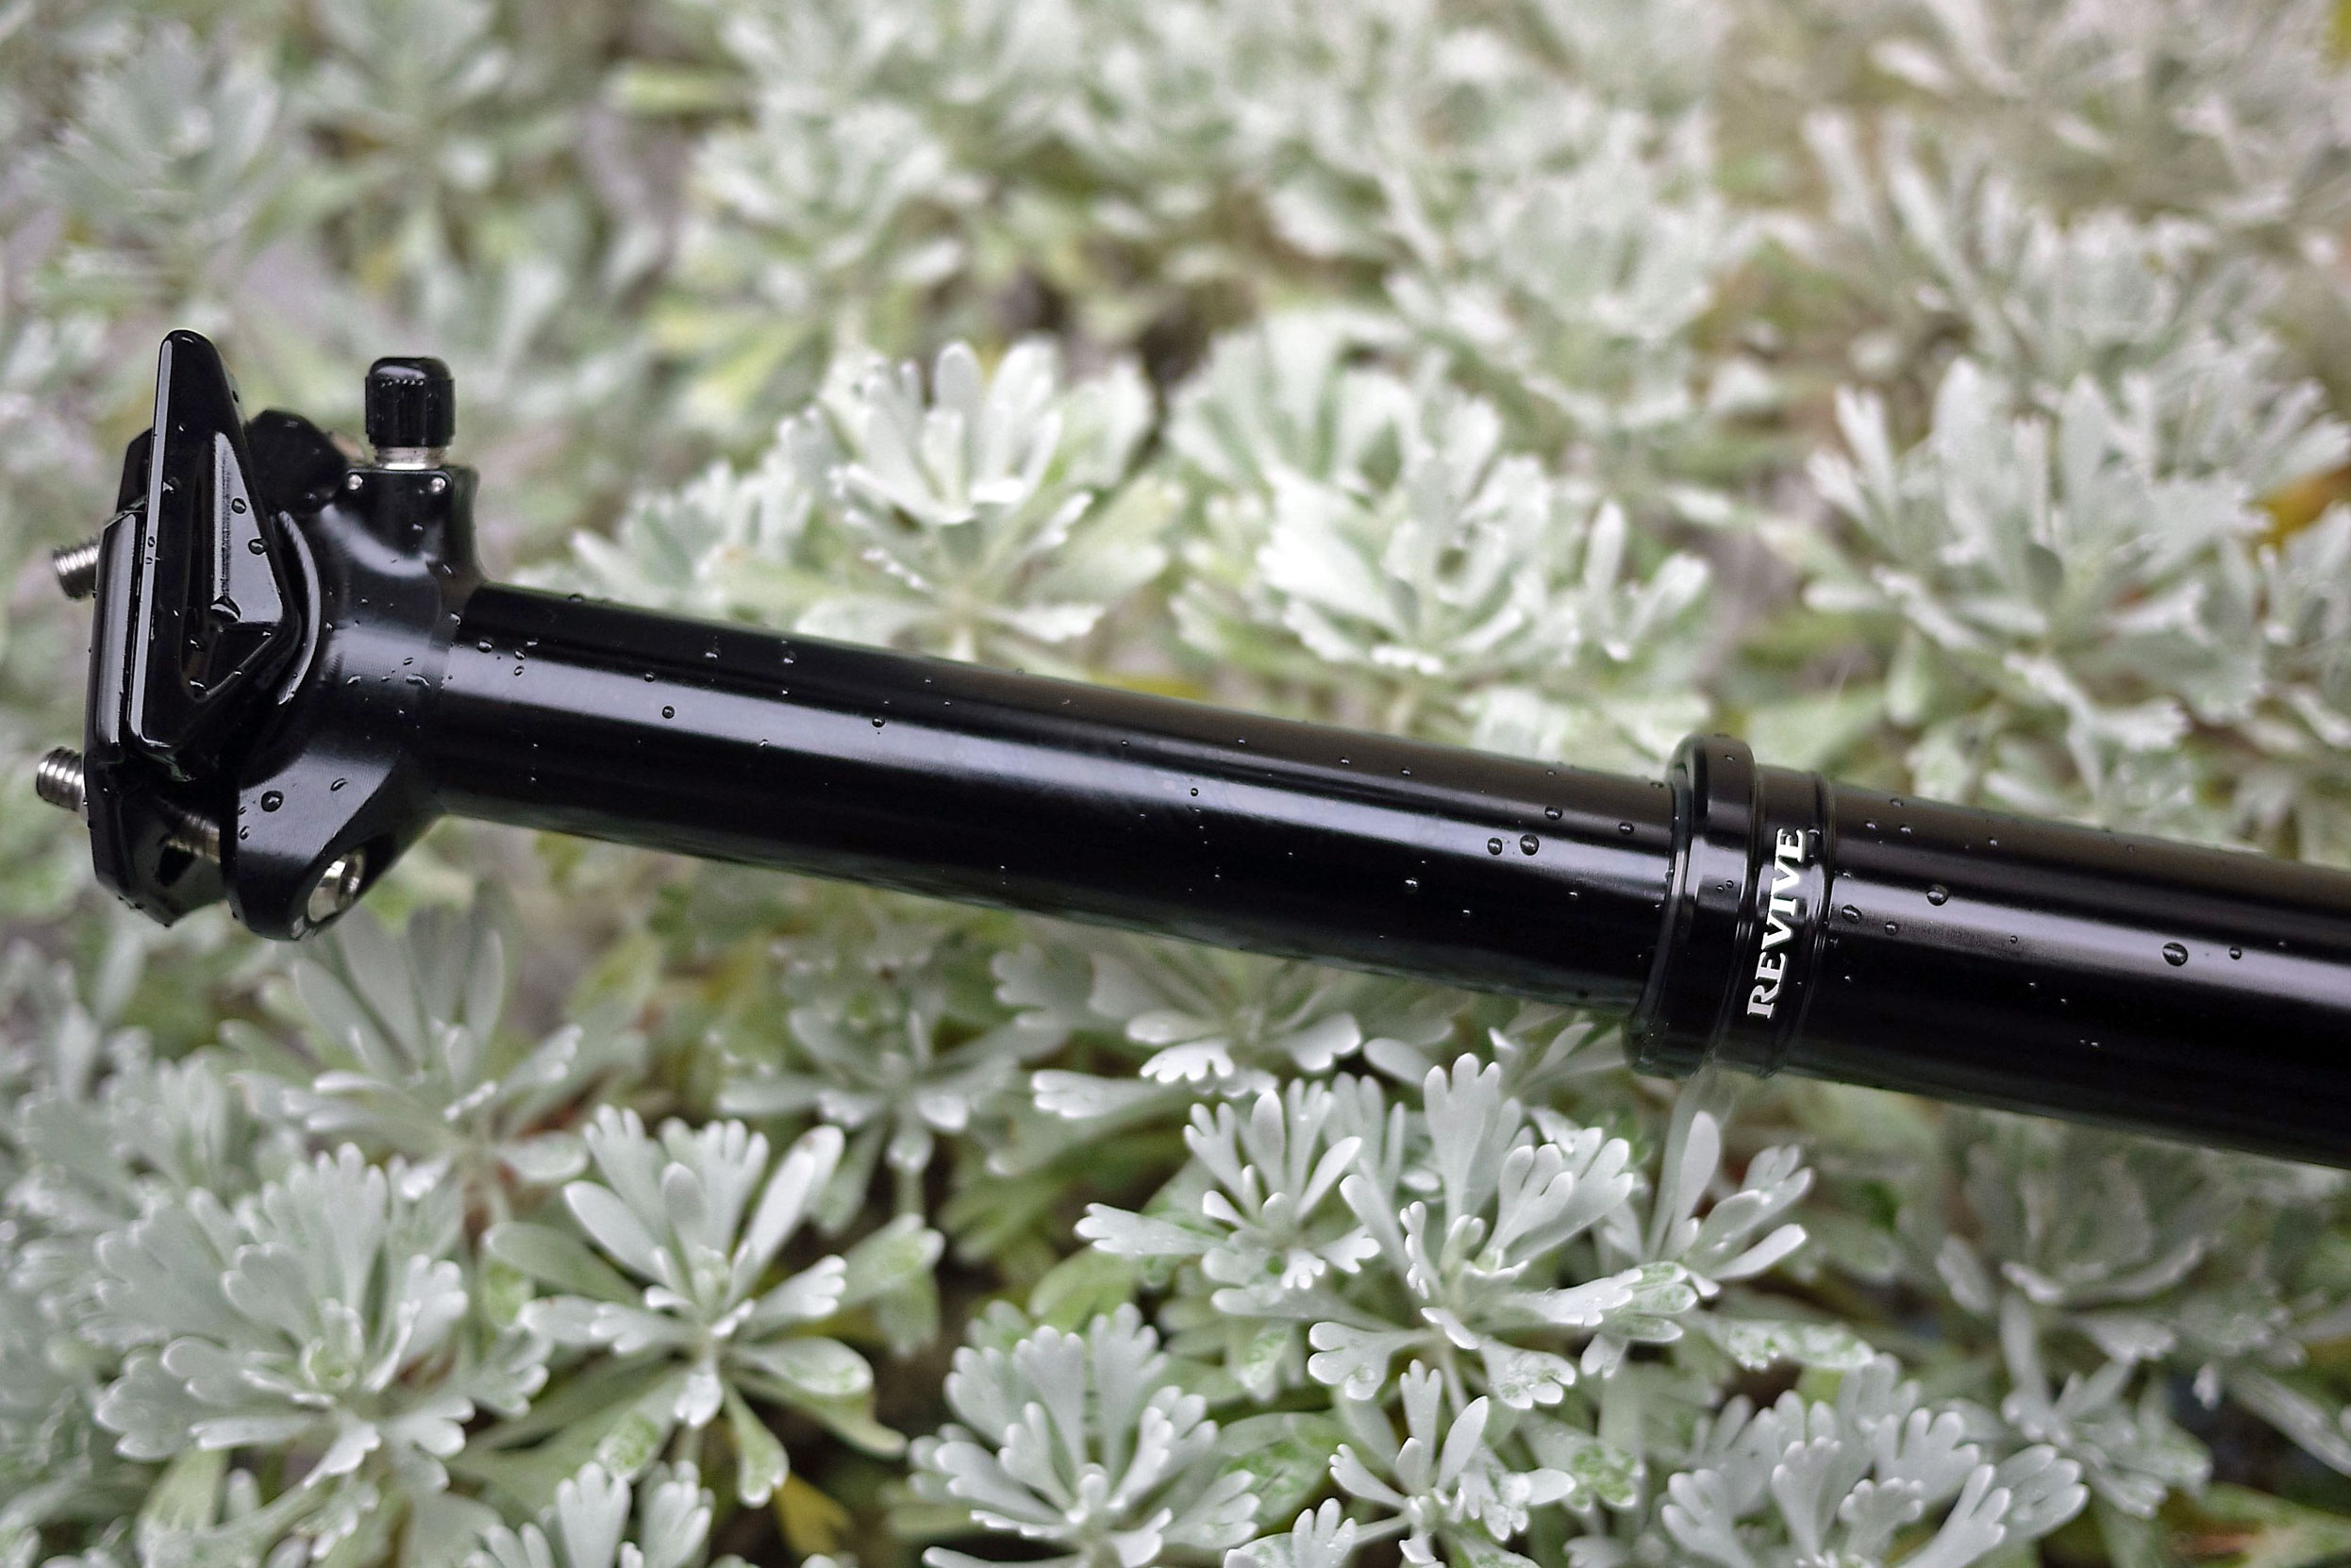 The Revive, a truly innovative dropper seatpost from BikeYoke